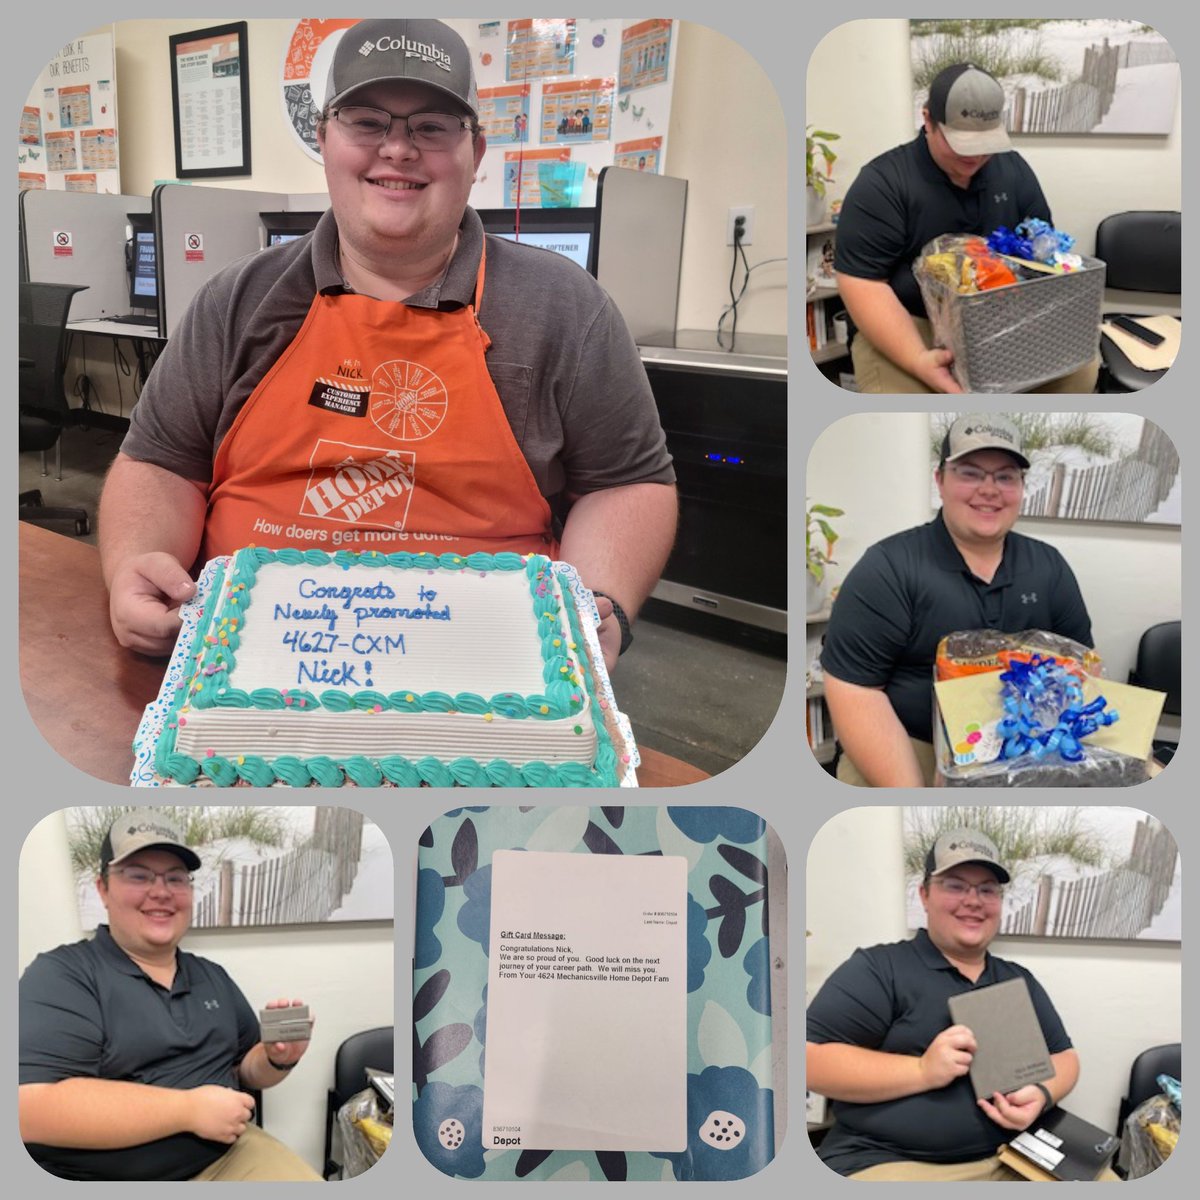 Bittersweet 😢 Goodbye to my Specialty Supervisor Nick, who will begin the next 📚 chapter of his career as CXM at Store 4627. You have a bright 💡 future ahead, skies 🌇 the limit. We will miss you! @HillaryHyatt @kmn293 @ShawndaSobless1 @Jme_Dvs @nickzwilliamsHD